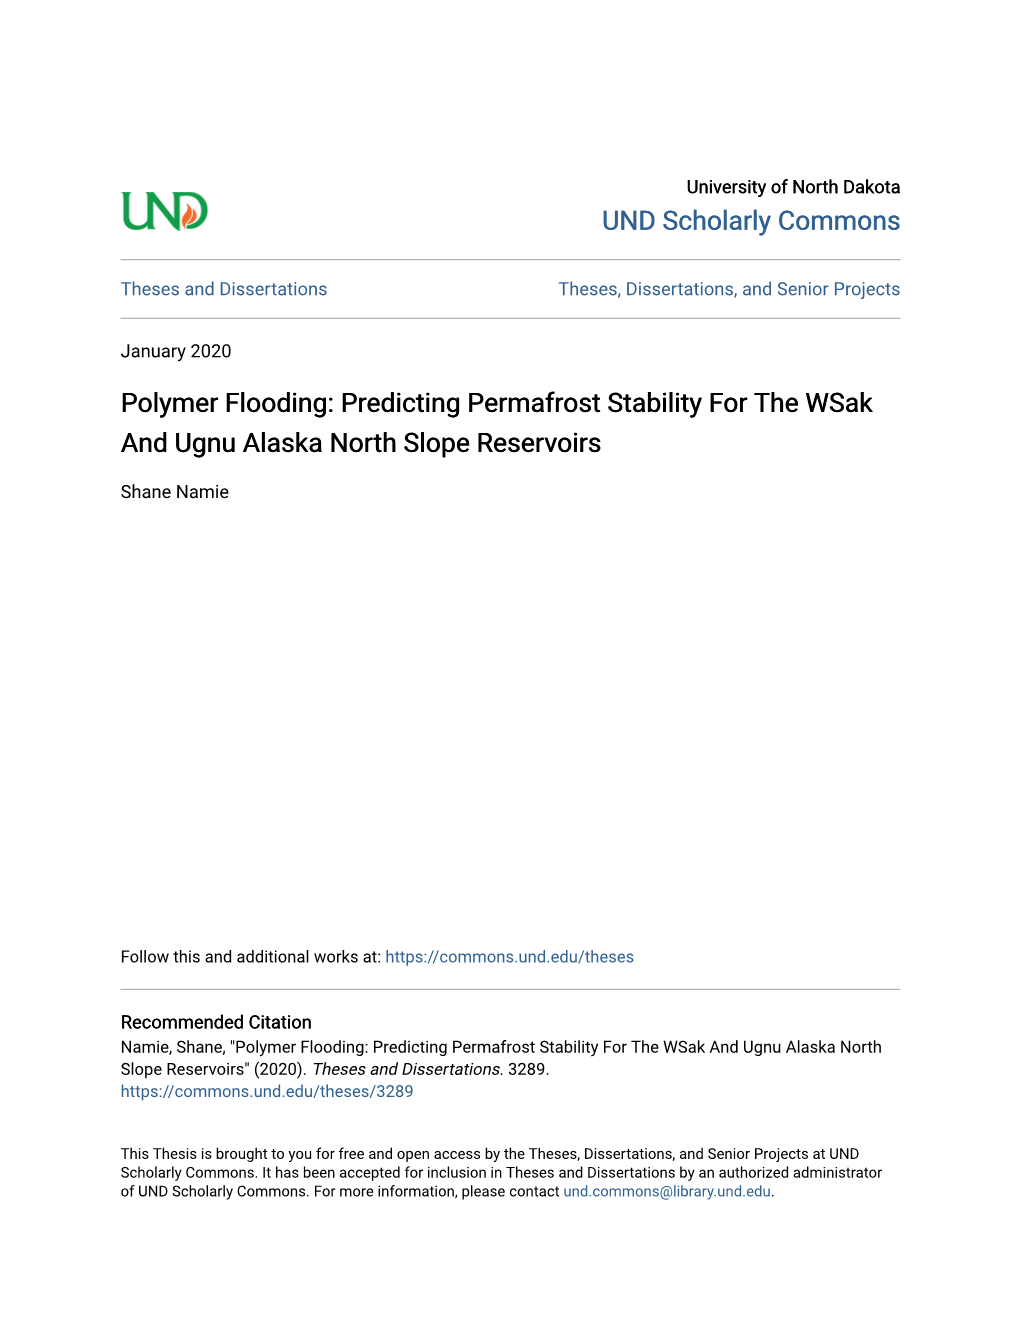 Polymer Flooding: Predicting Permafrost Stability for the Wsak and Ugnu Alaska North Slope Reservoirs